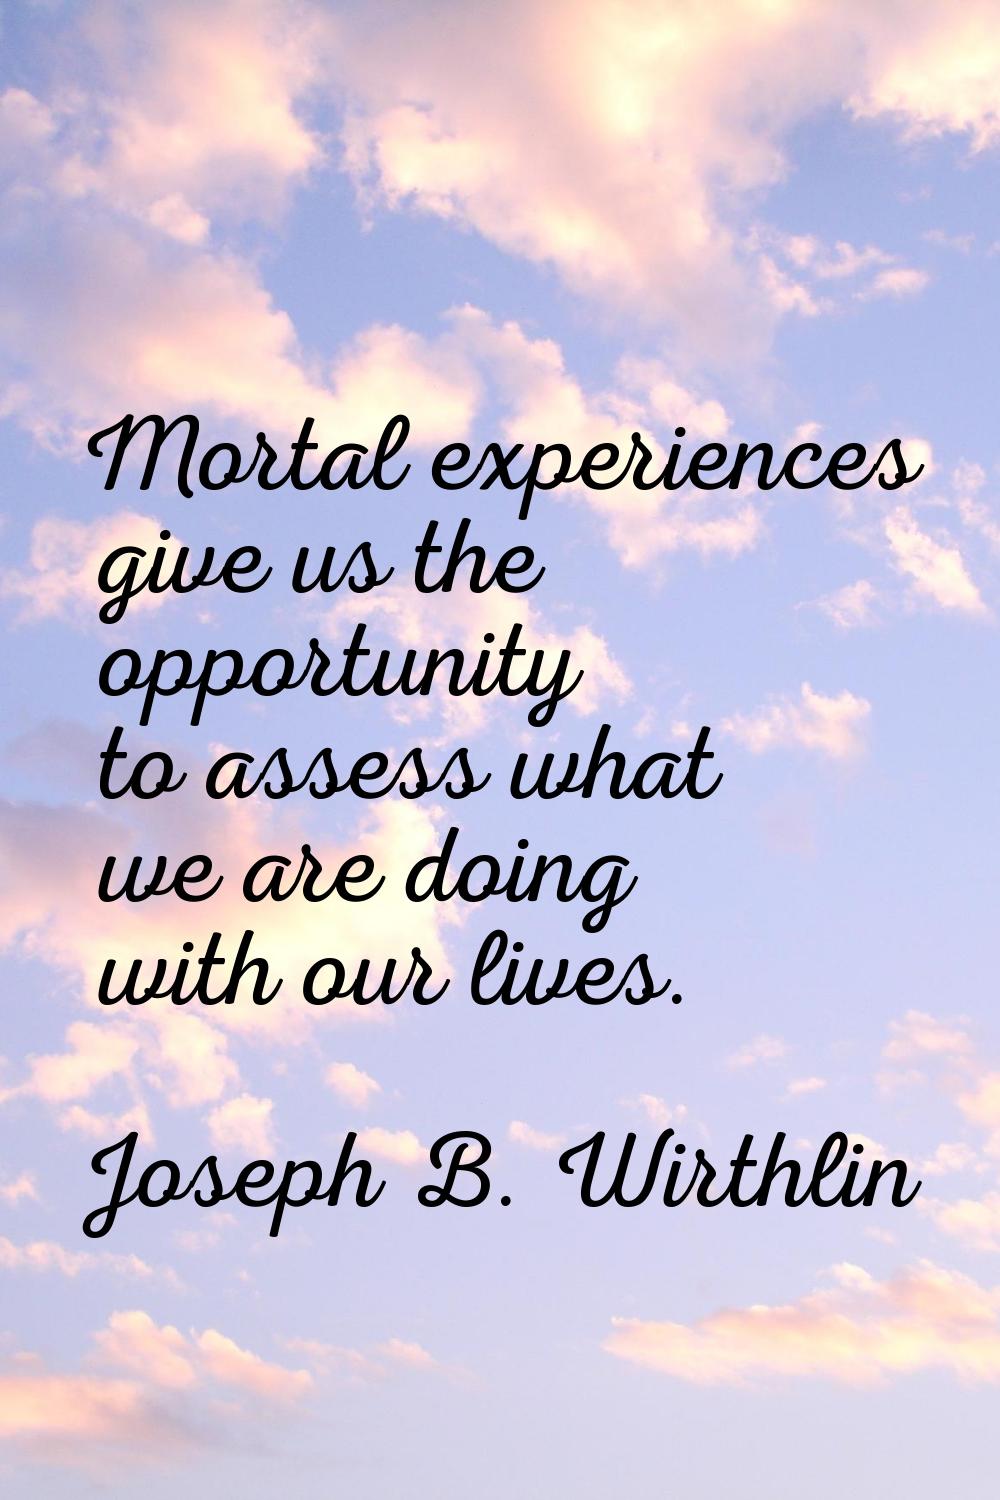 Mortal experiences give us the opportunity to assess what we are doing with our lives.